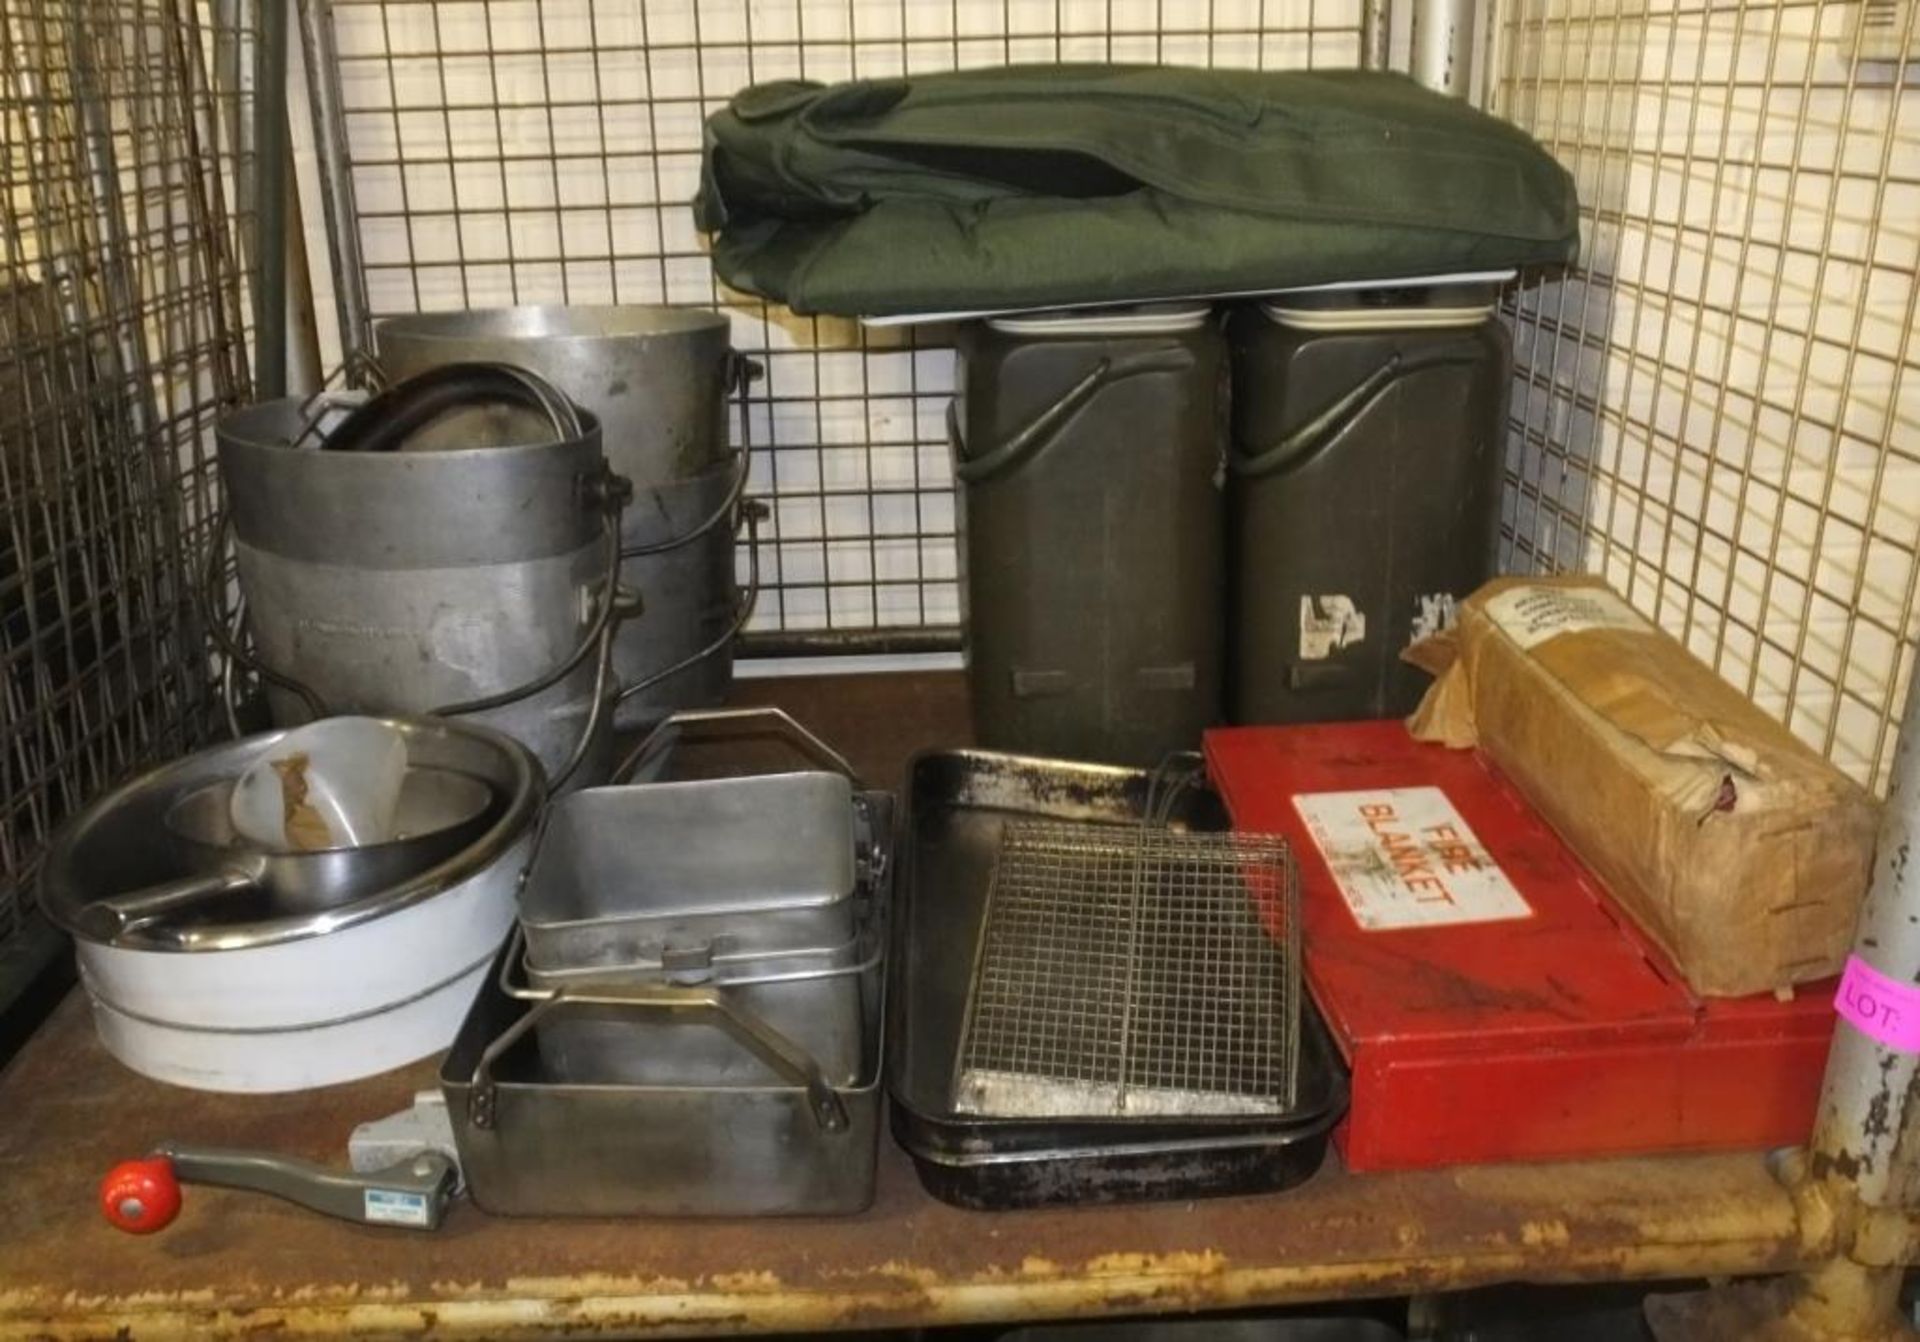 Field Kitchen set - cooker, oven, utensil set in carry box, norweigen food boxes - Image 2 of 4